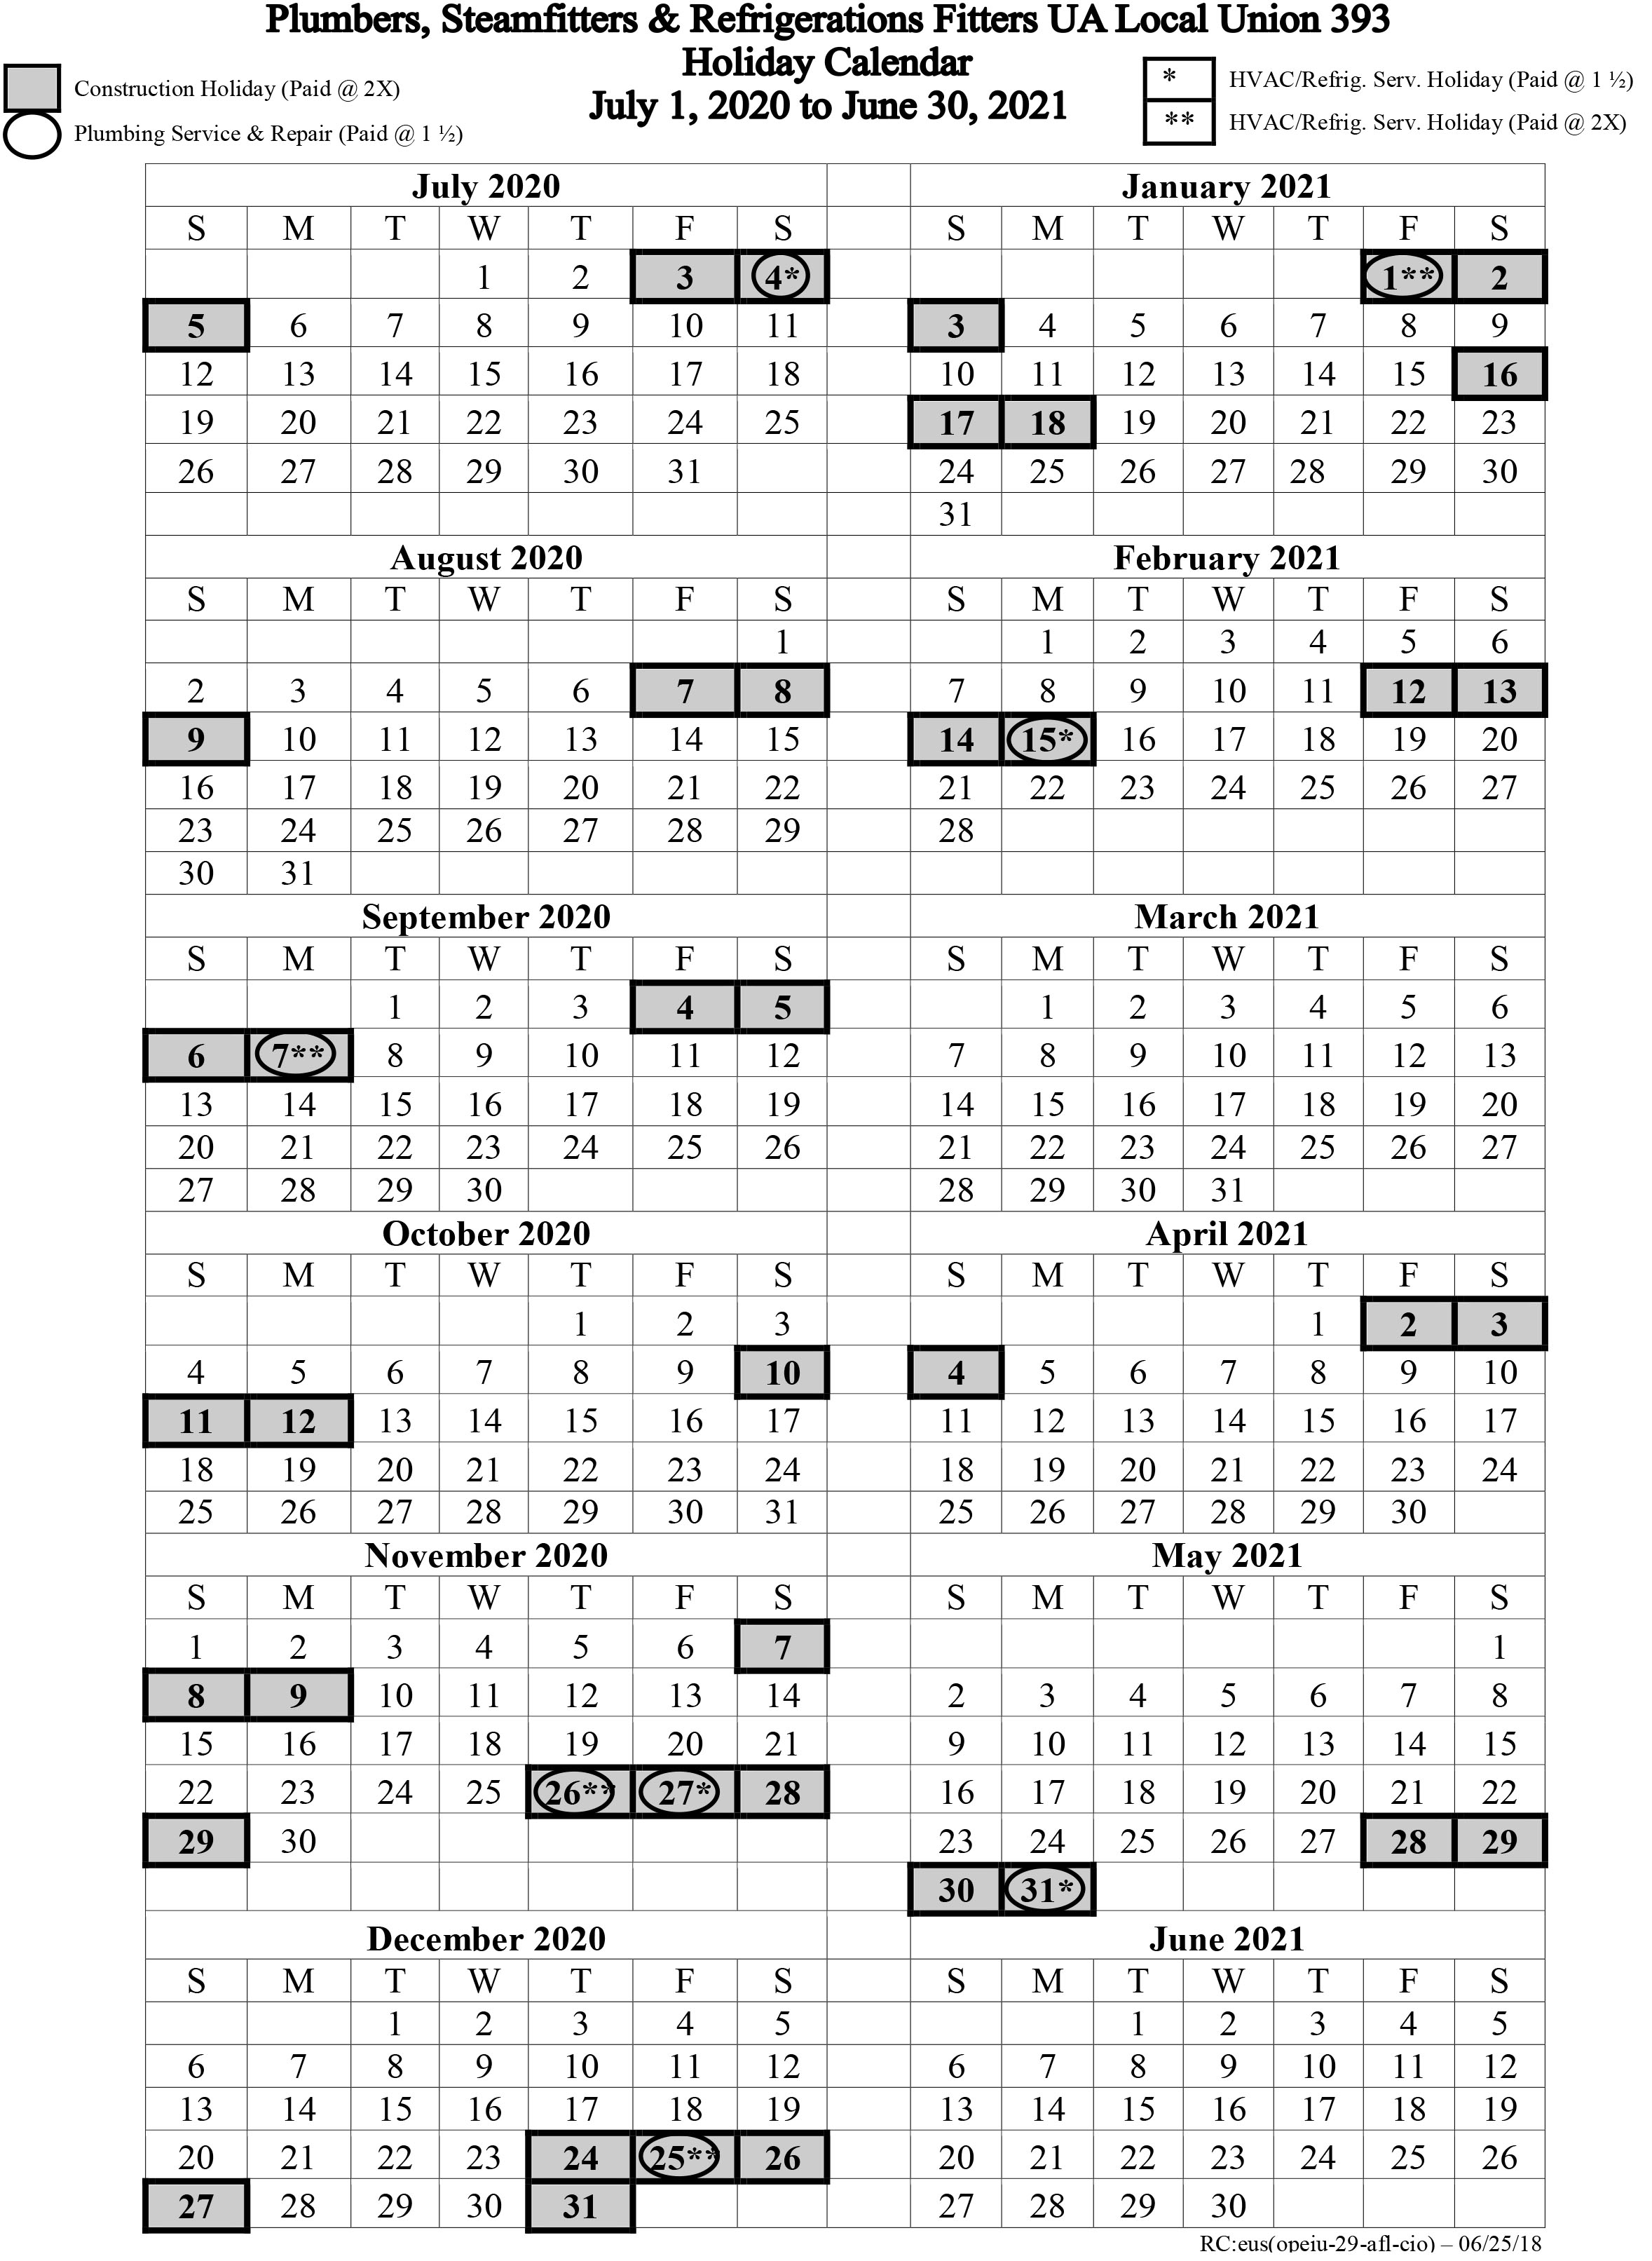 New Holiday Calendar Available Local 393